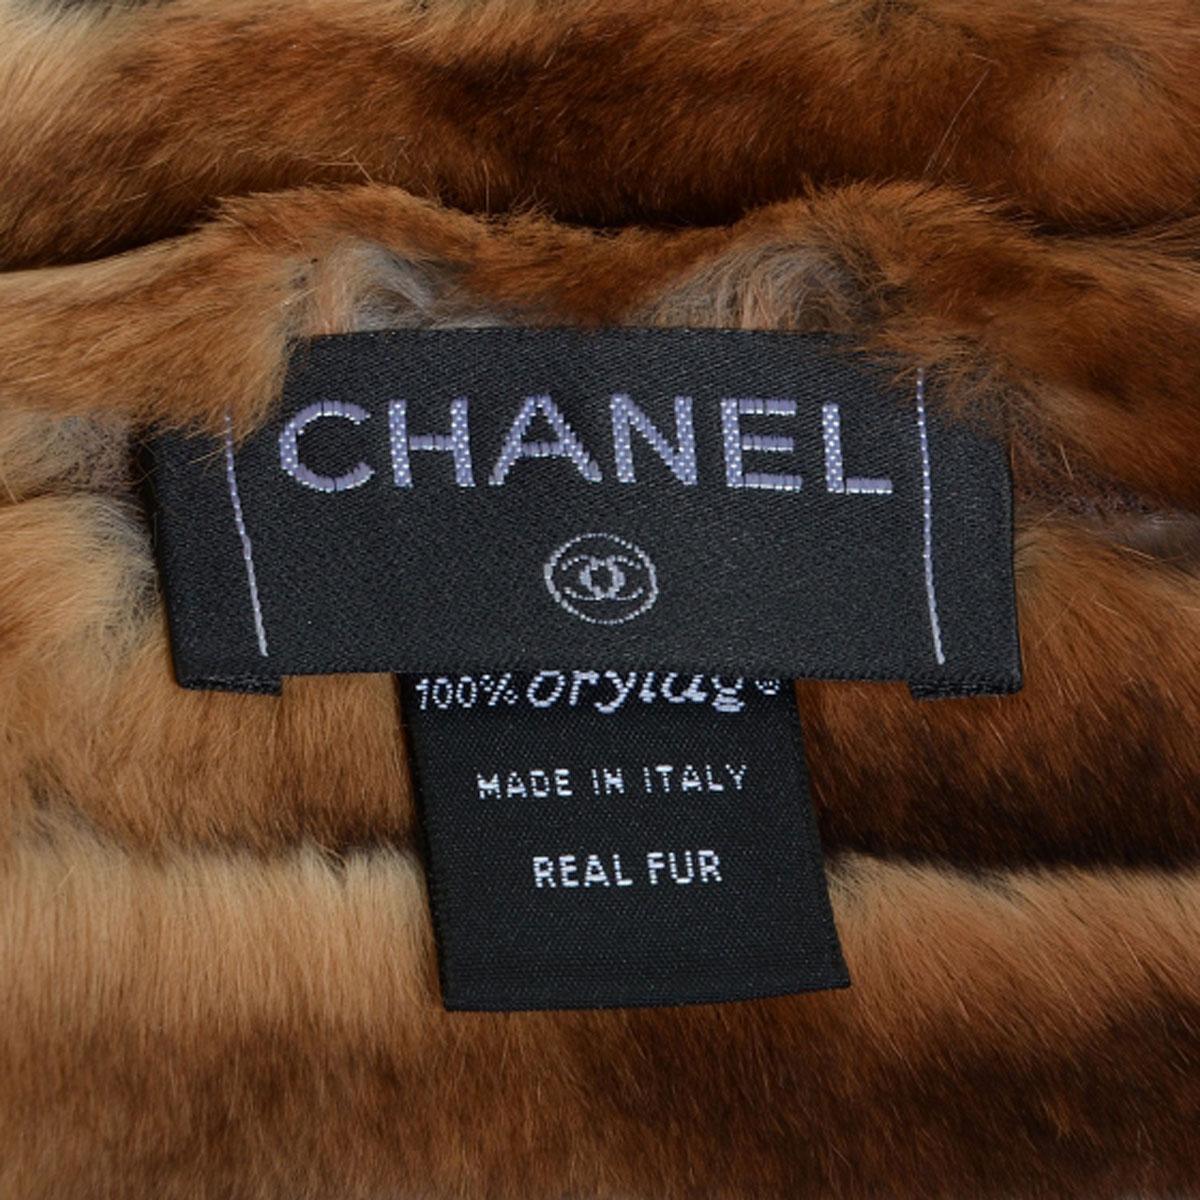 Chanel 2017 Brown Rabbit Fur Iconic CC Warm Soft Winter Stole Scarf Wrap  In Excellent Condition For Sale In Miami, FL